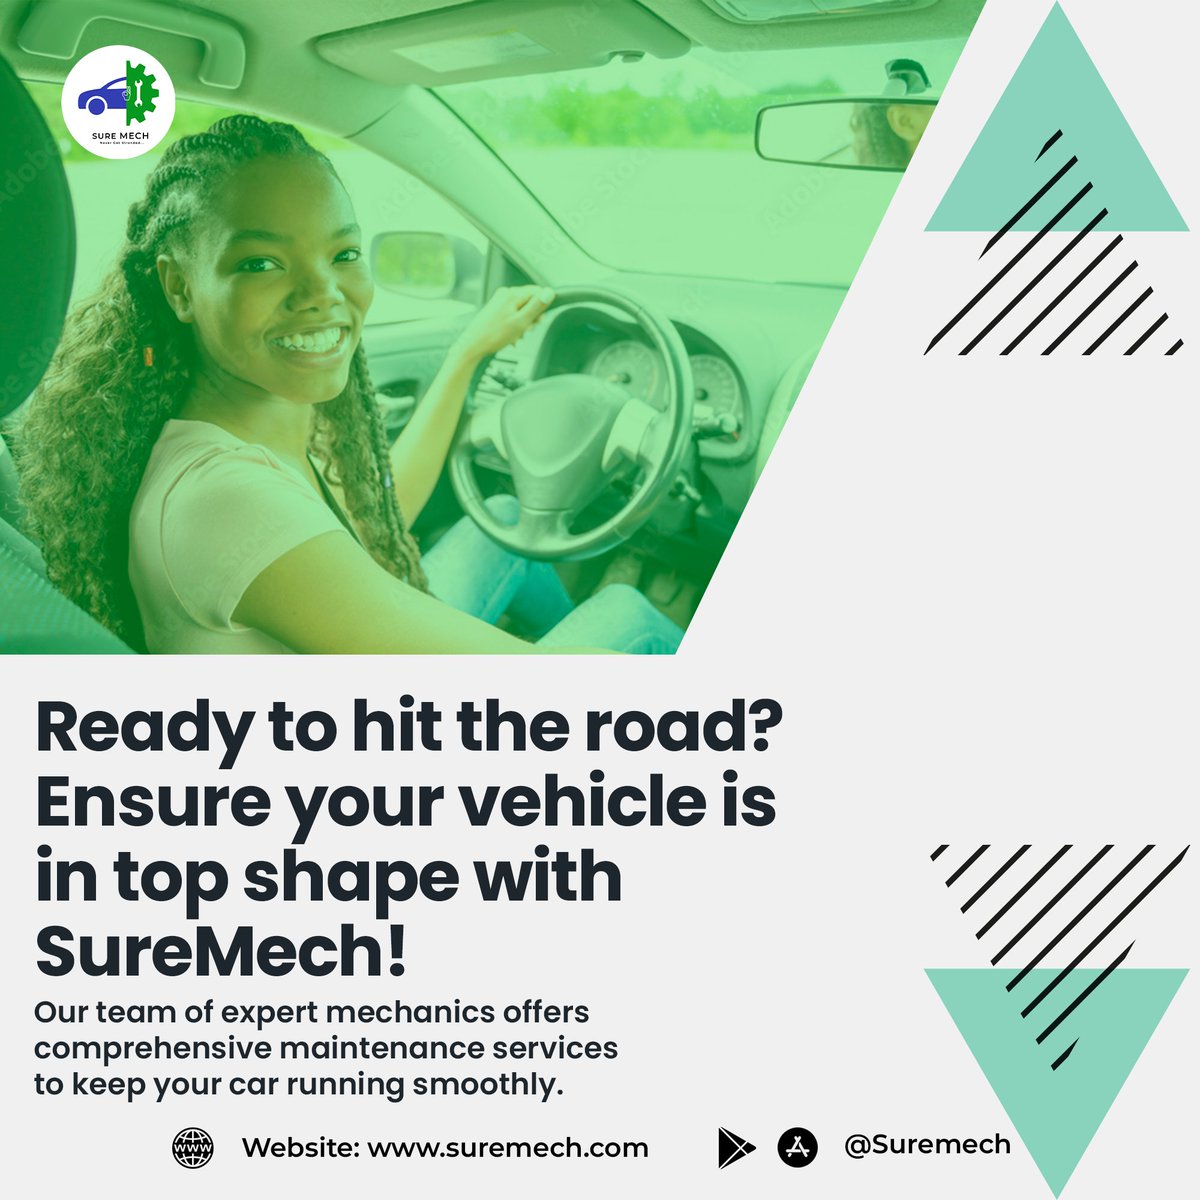 Hit the road worry-free with SureMech! 🚗 Our expert mechanics keep your car running smoothly with top-notch maintenance services. From routine check-ups to handling breakdowns, we’ve got you covered. Drive with peace of mind – schedule your service appointment today! #SureMech